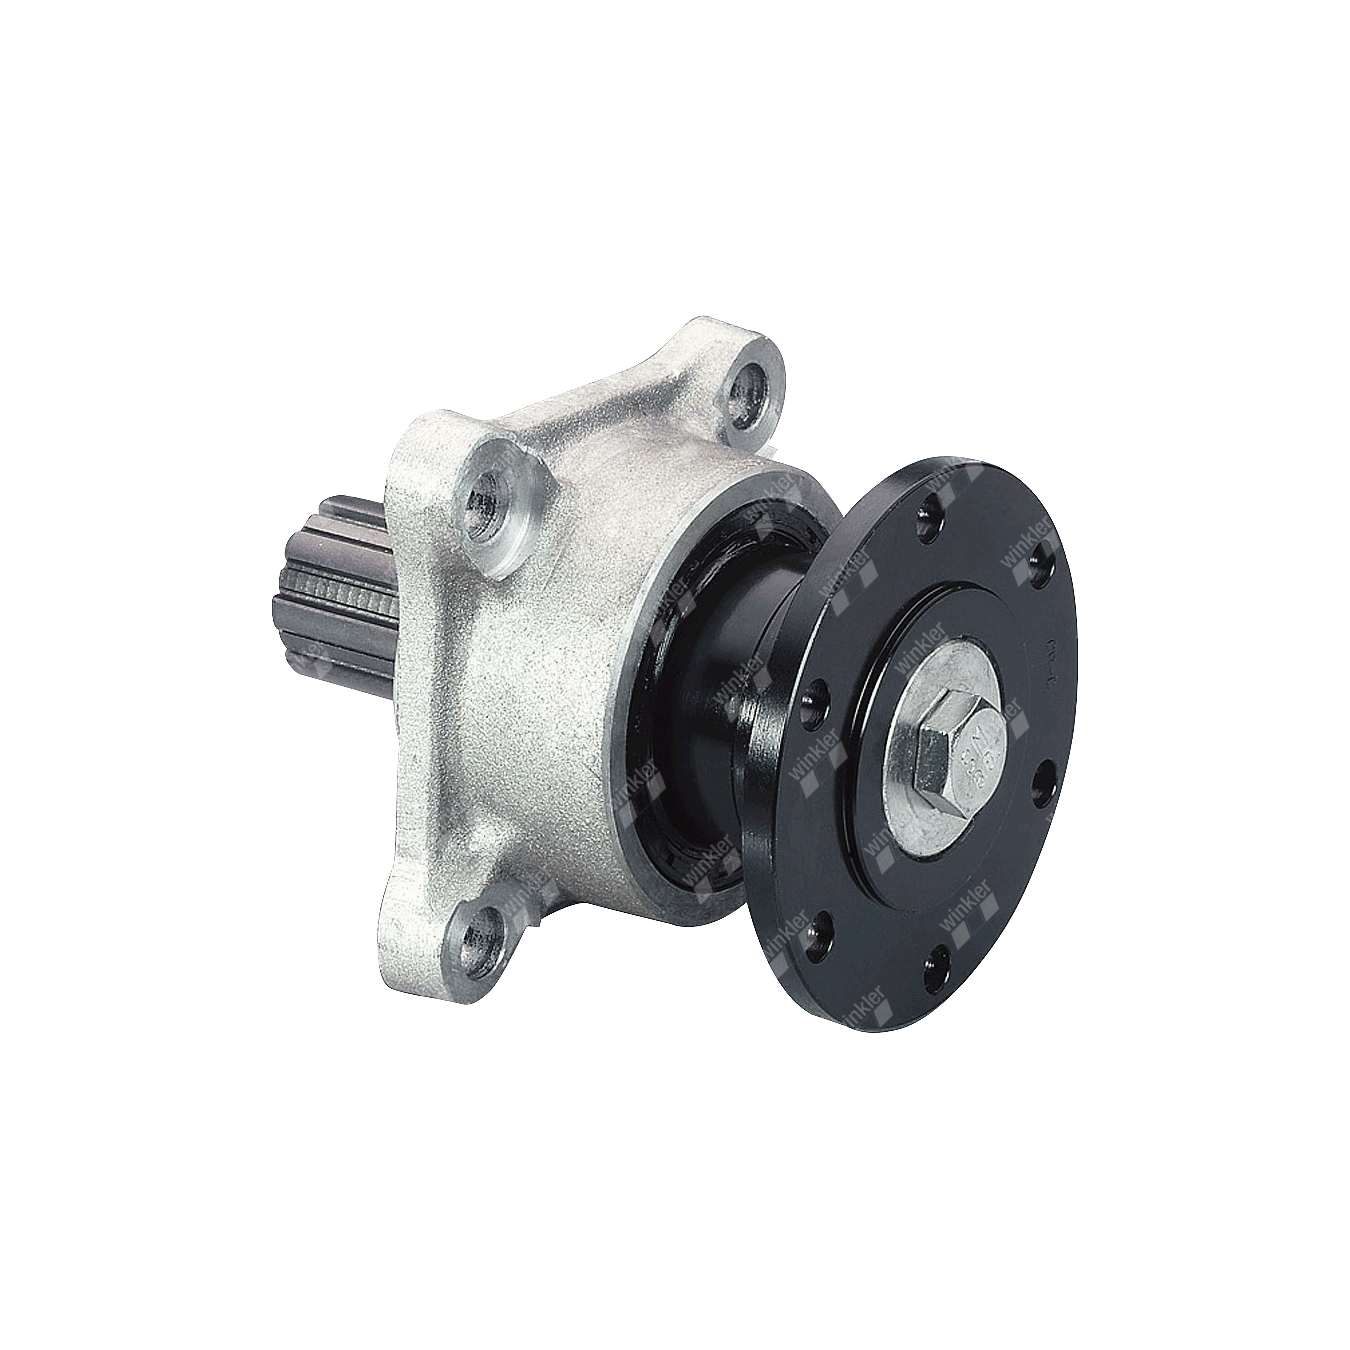 winkler shop - Adapter for auxiliary drive, DIN 5462